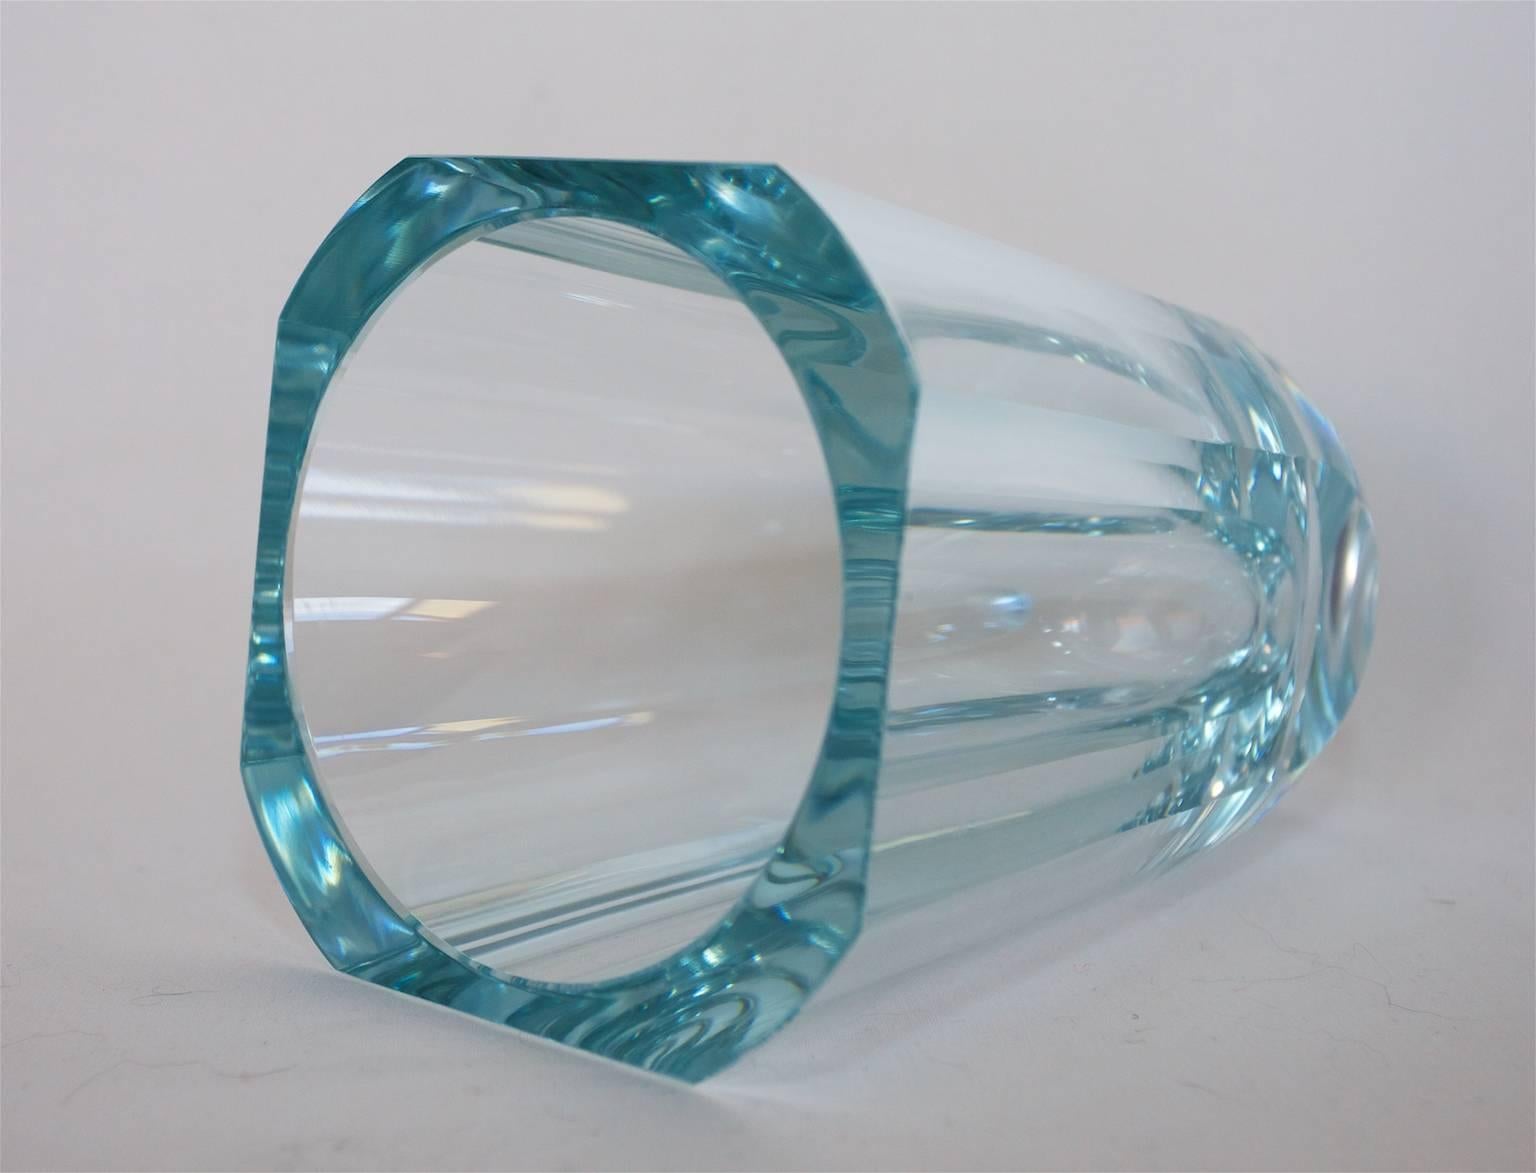 A beautiful clear octagonal blown and cut-glass Orrefors vase. 
Signed Orrefors, 1946, Sweden. 

The vase is simple in its form yet very elegant. 
A discrete beauty

The glass has a blueish tone.